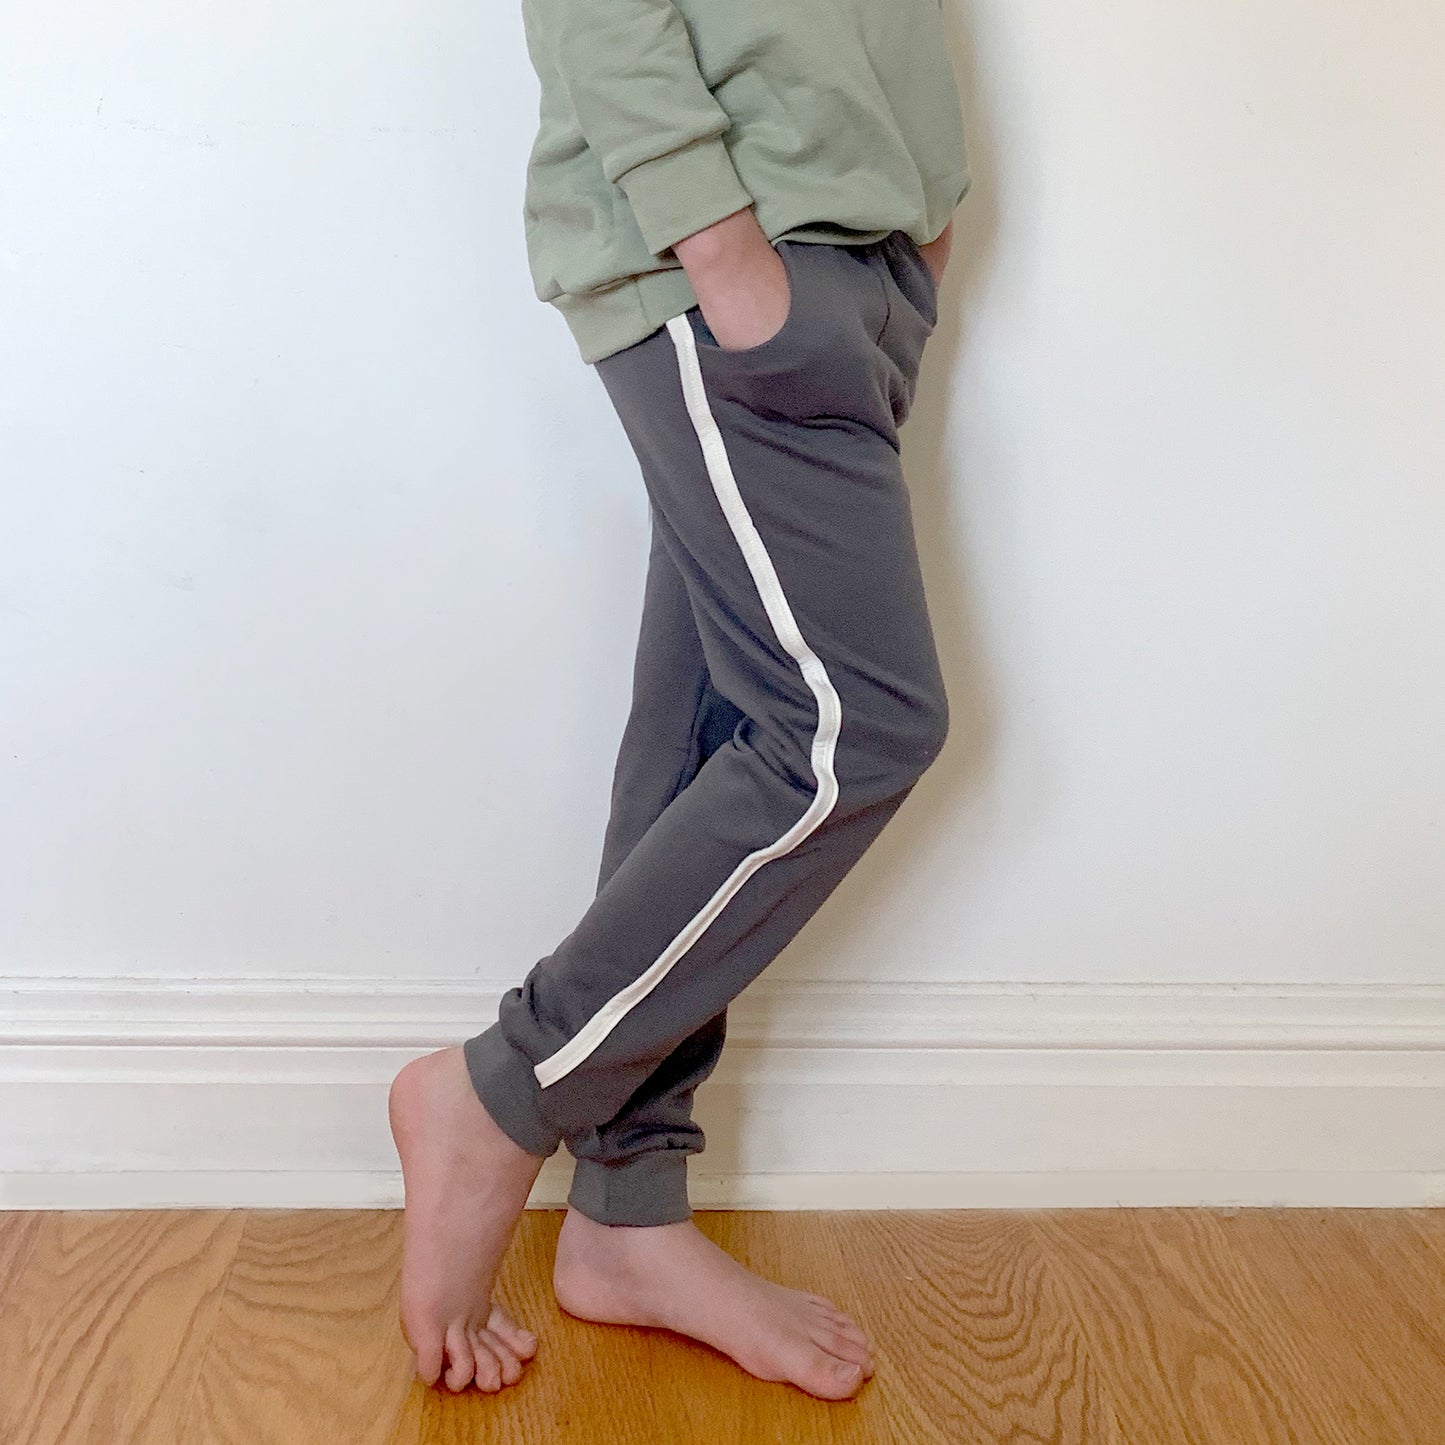 Track Pants - Solid Pink